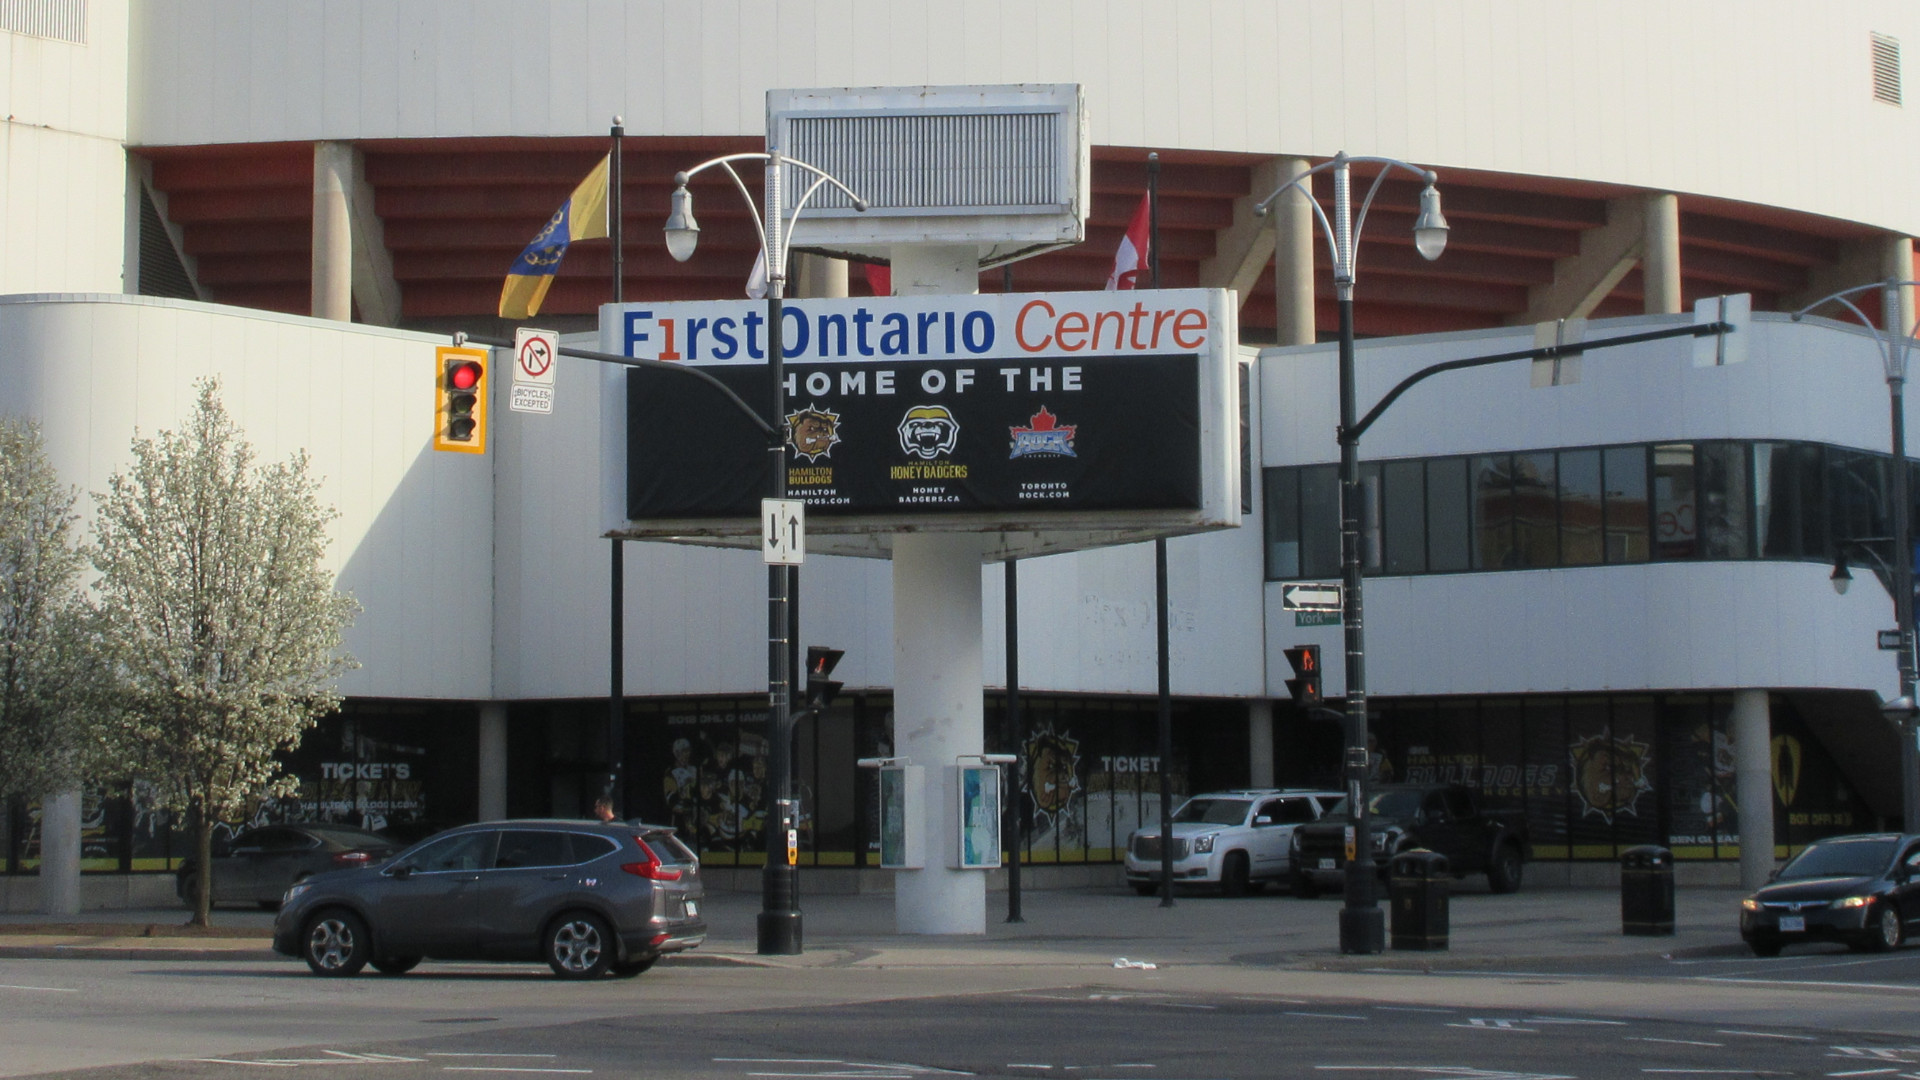 Geography and growth lured partnership redeveloping Hamilton’s downtown arena